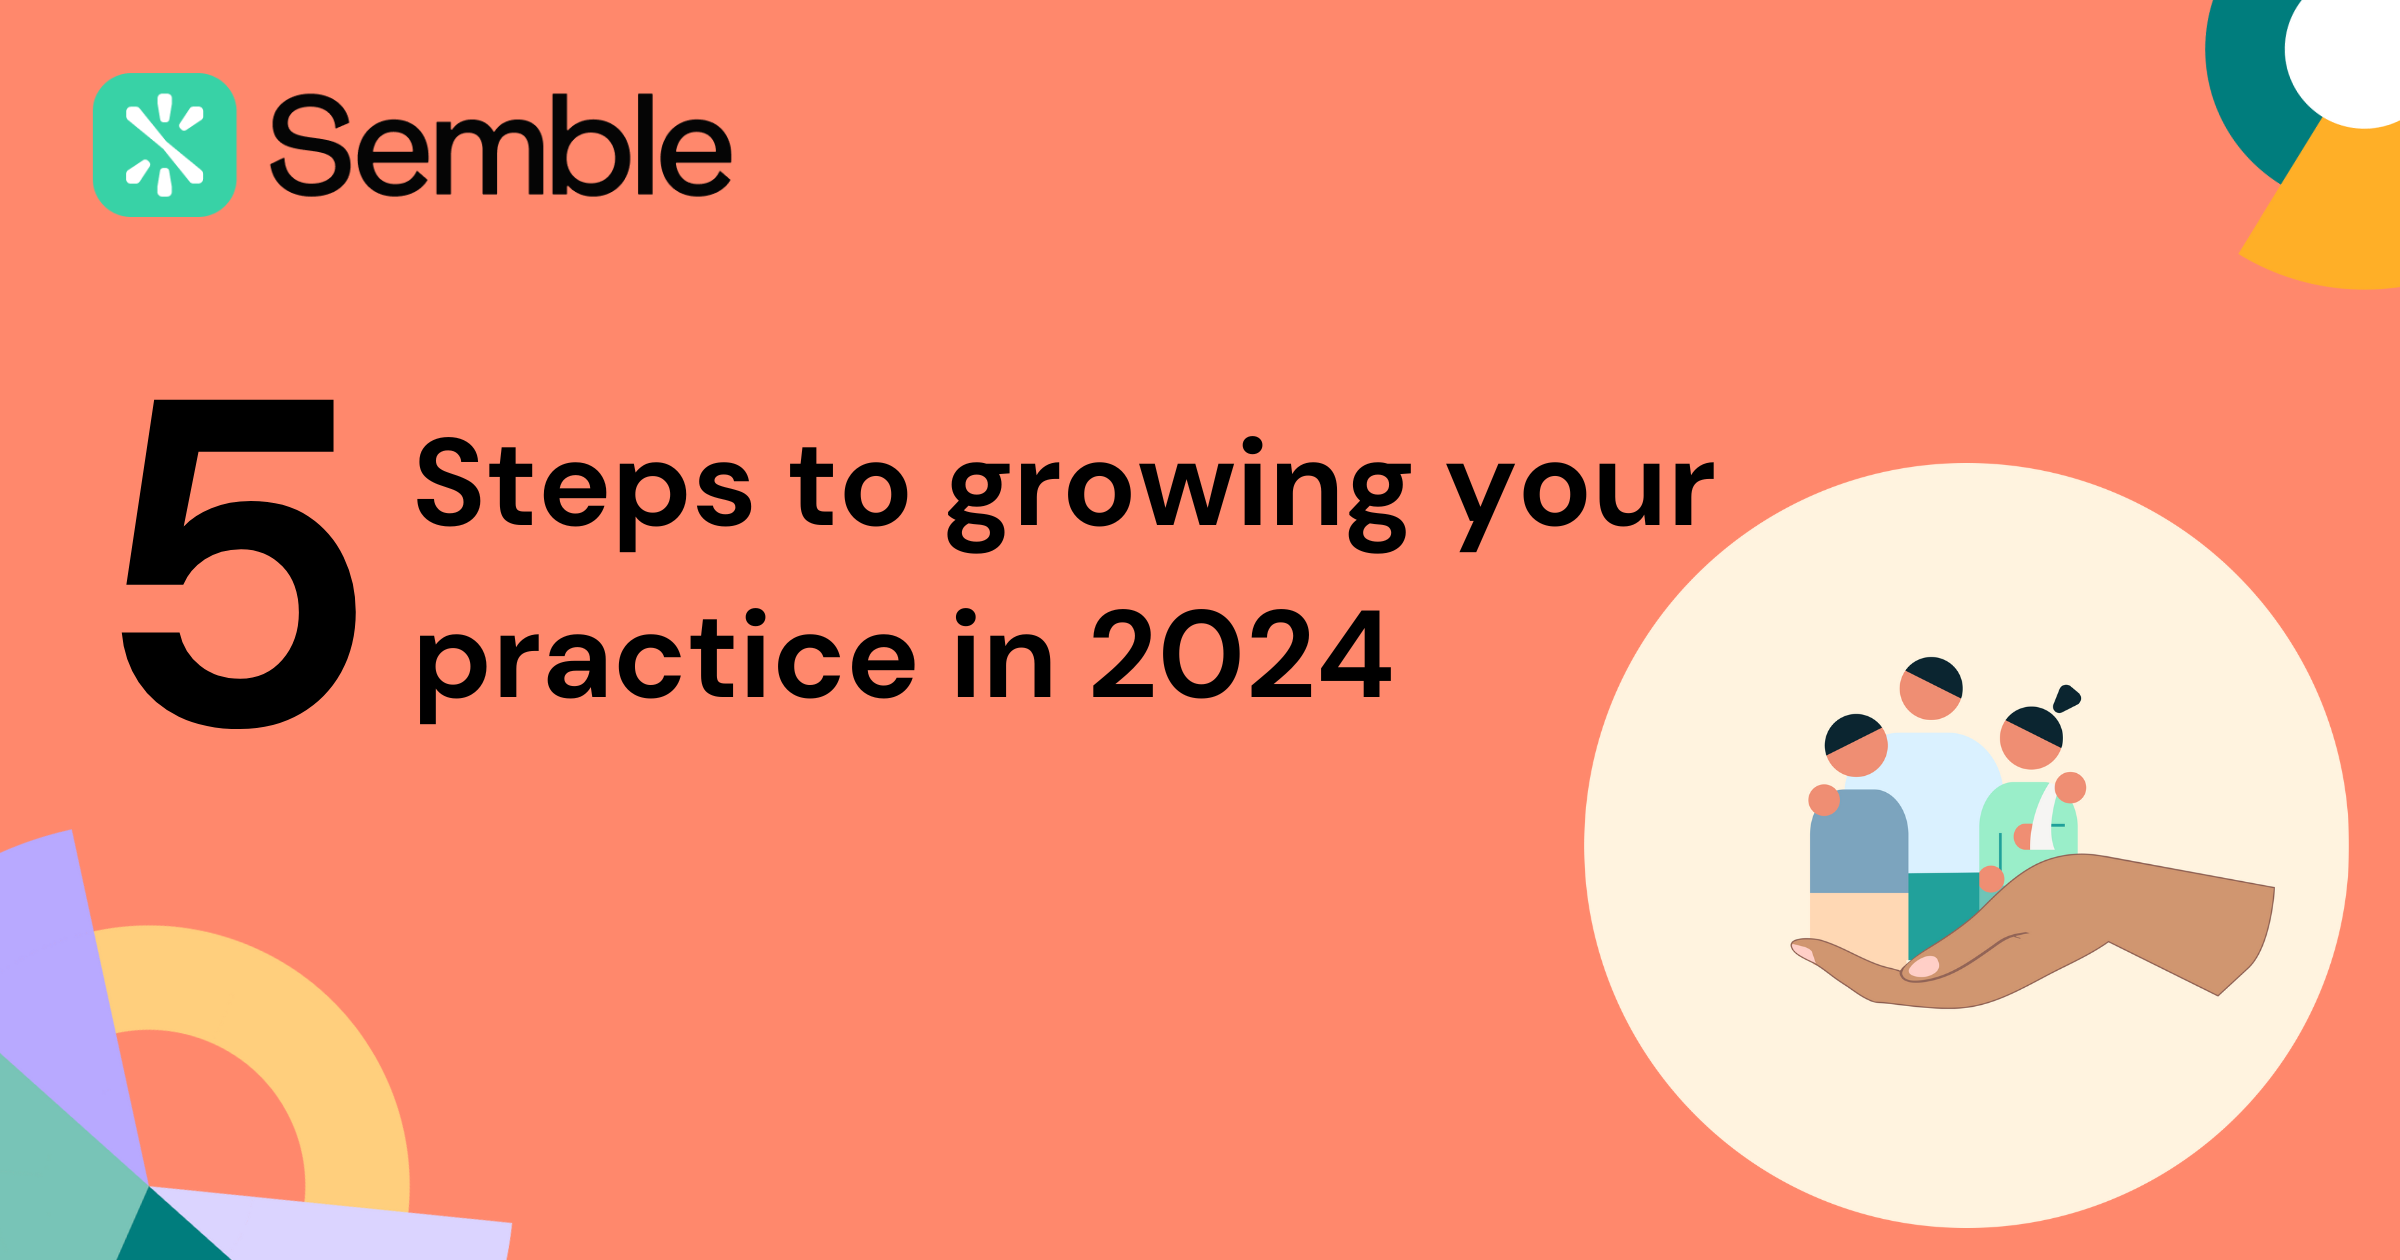 How to grow your private practice in 2024